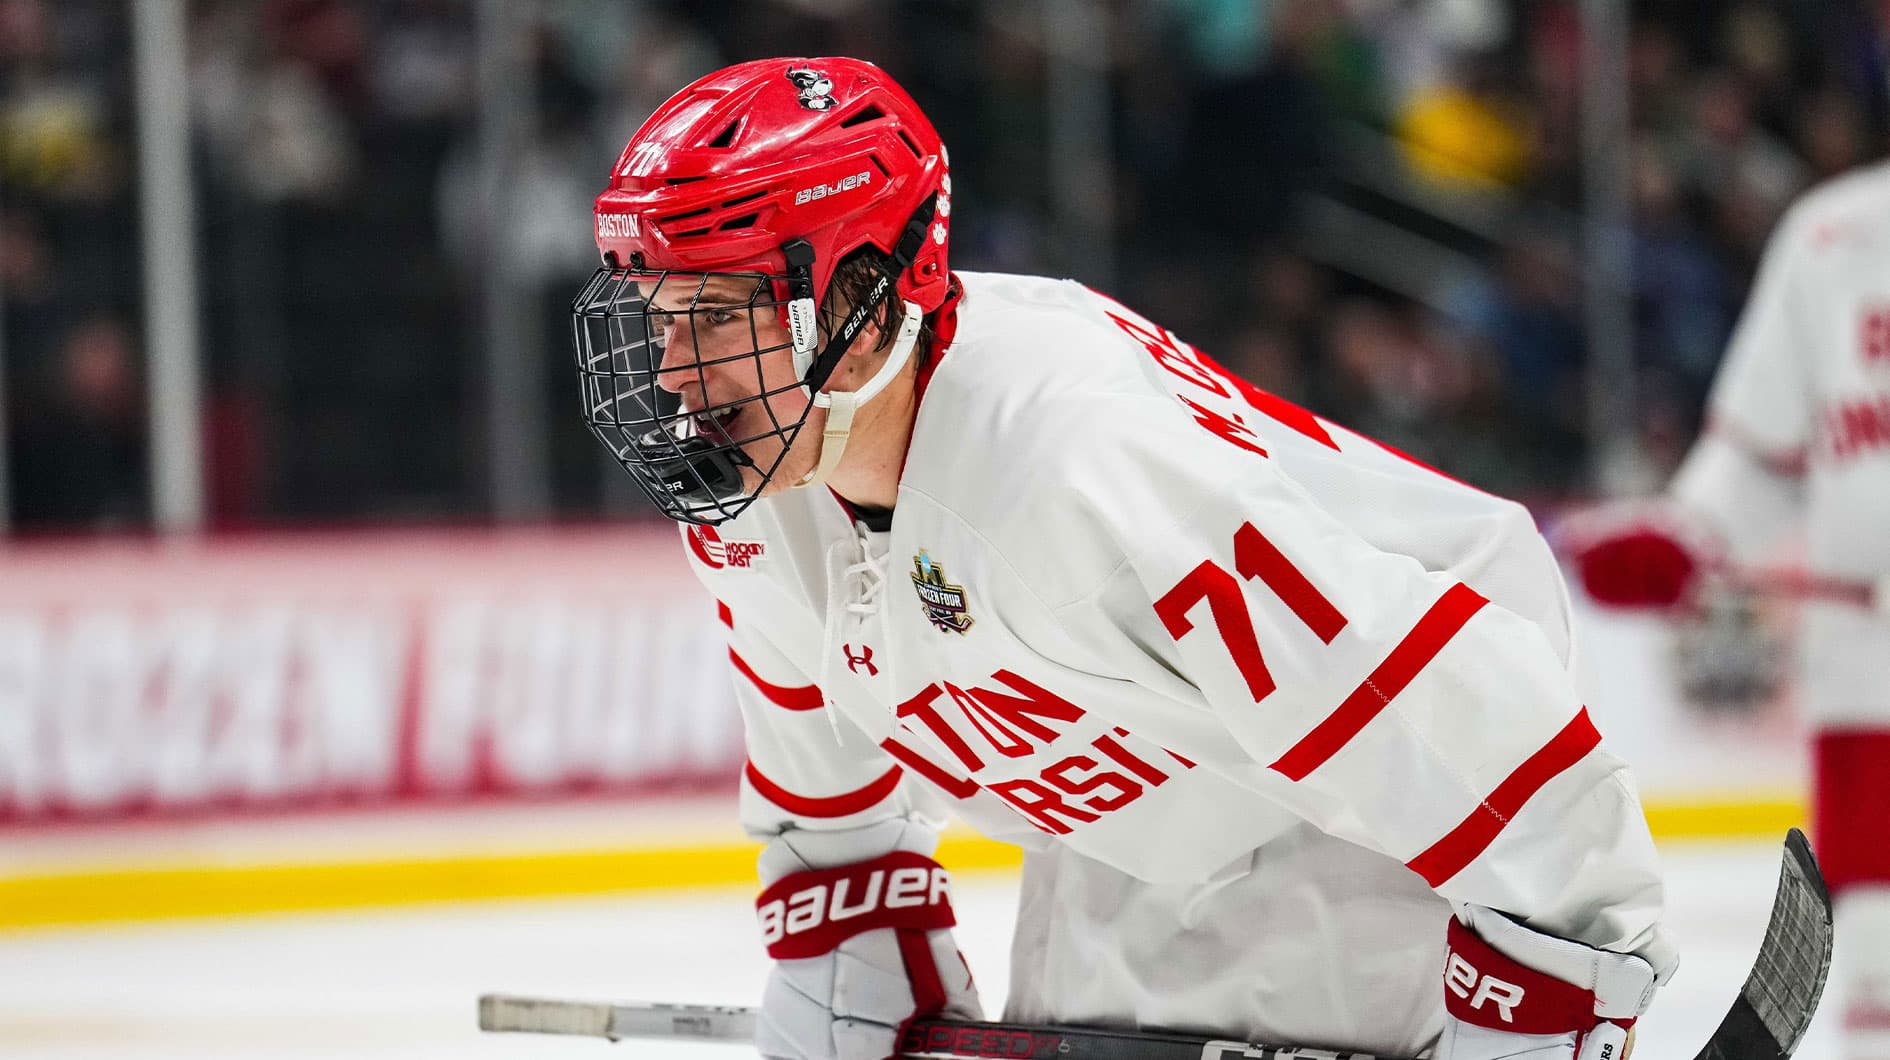 Boston U. forward Macklin Celebrini (71) looks on in the semifinals of the 2024 Frozen Four college ice hockey tournament during the first period against the Denver at Xcel Energy Center.